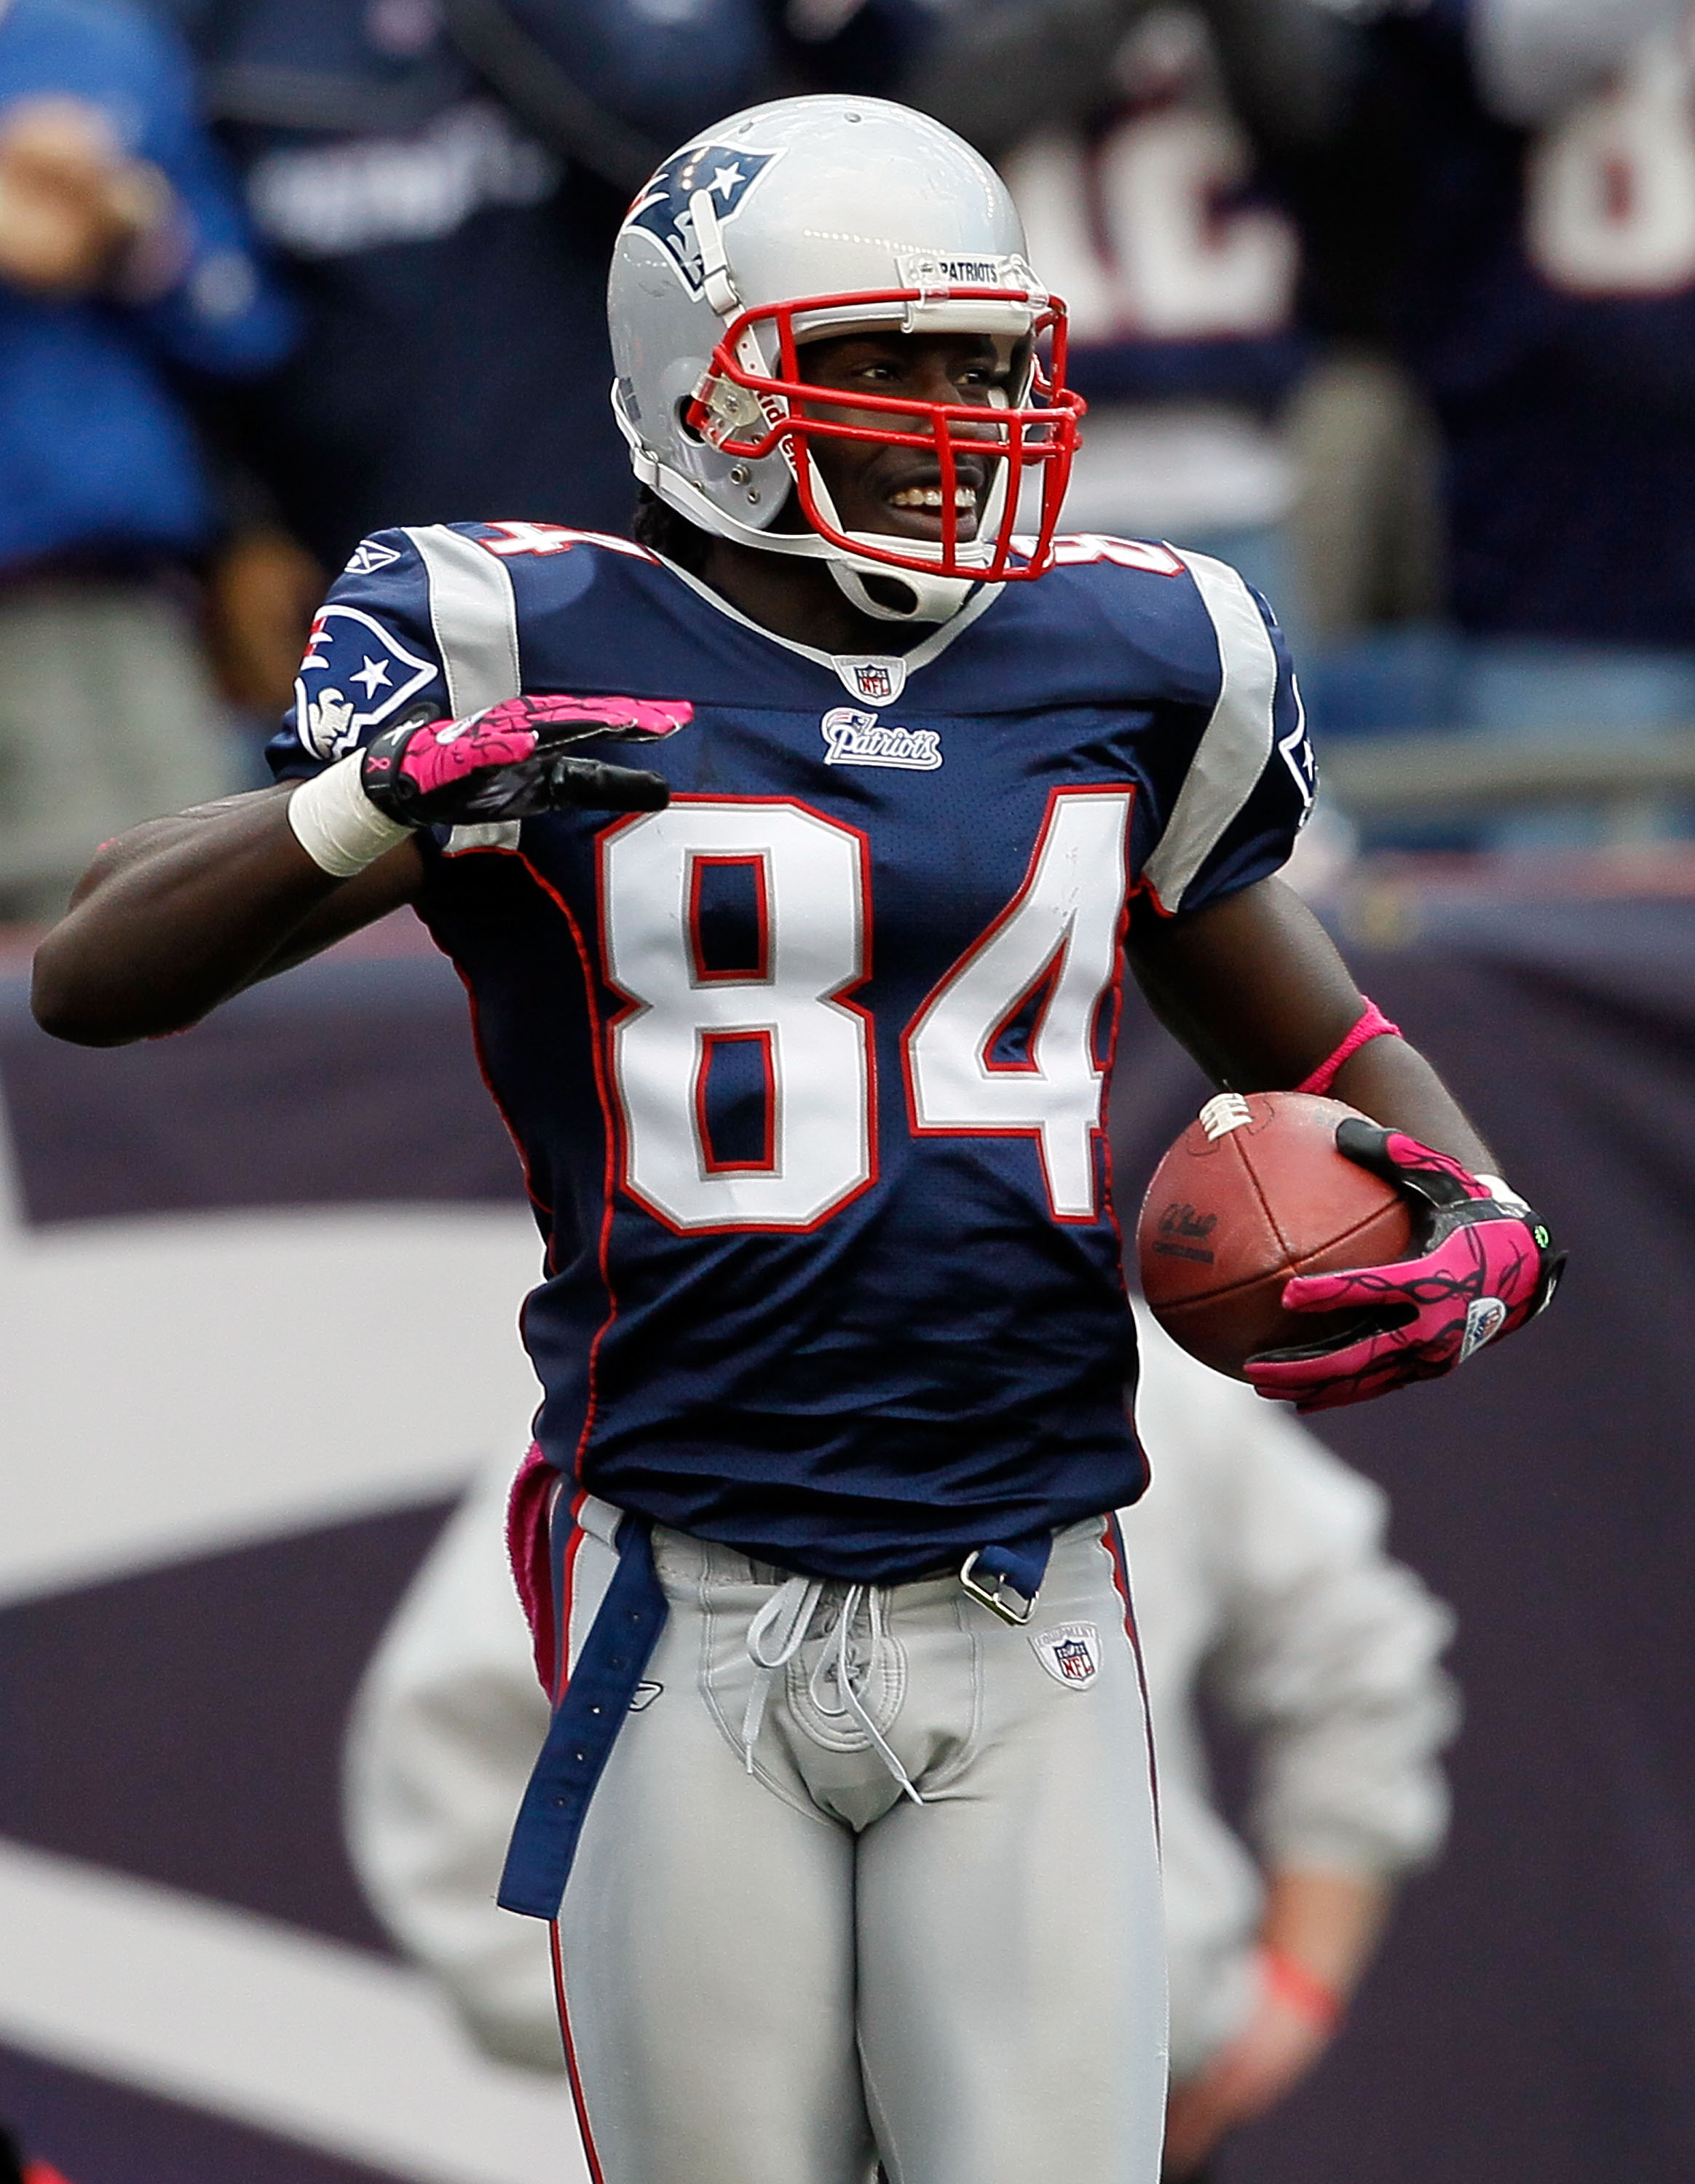 FOXBORO, MA - OCTOBER 17:  Deion Branch #84 of the New England Patriots after he caught a touchdown pass in the second half against the Baltimore Ravens at Gillette Stadium on October 17, 2010 in Foxboro, Massachusetts. The Patriot won 23-20 in overtime.